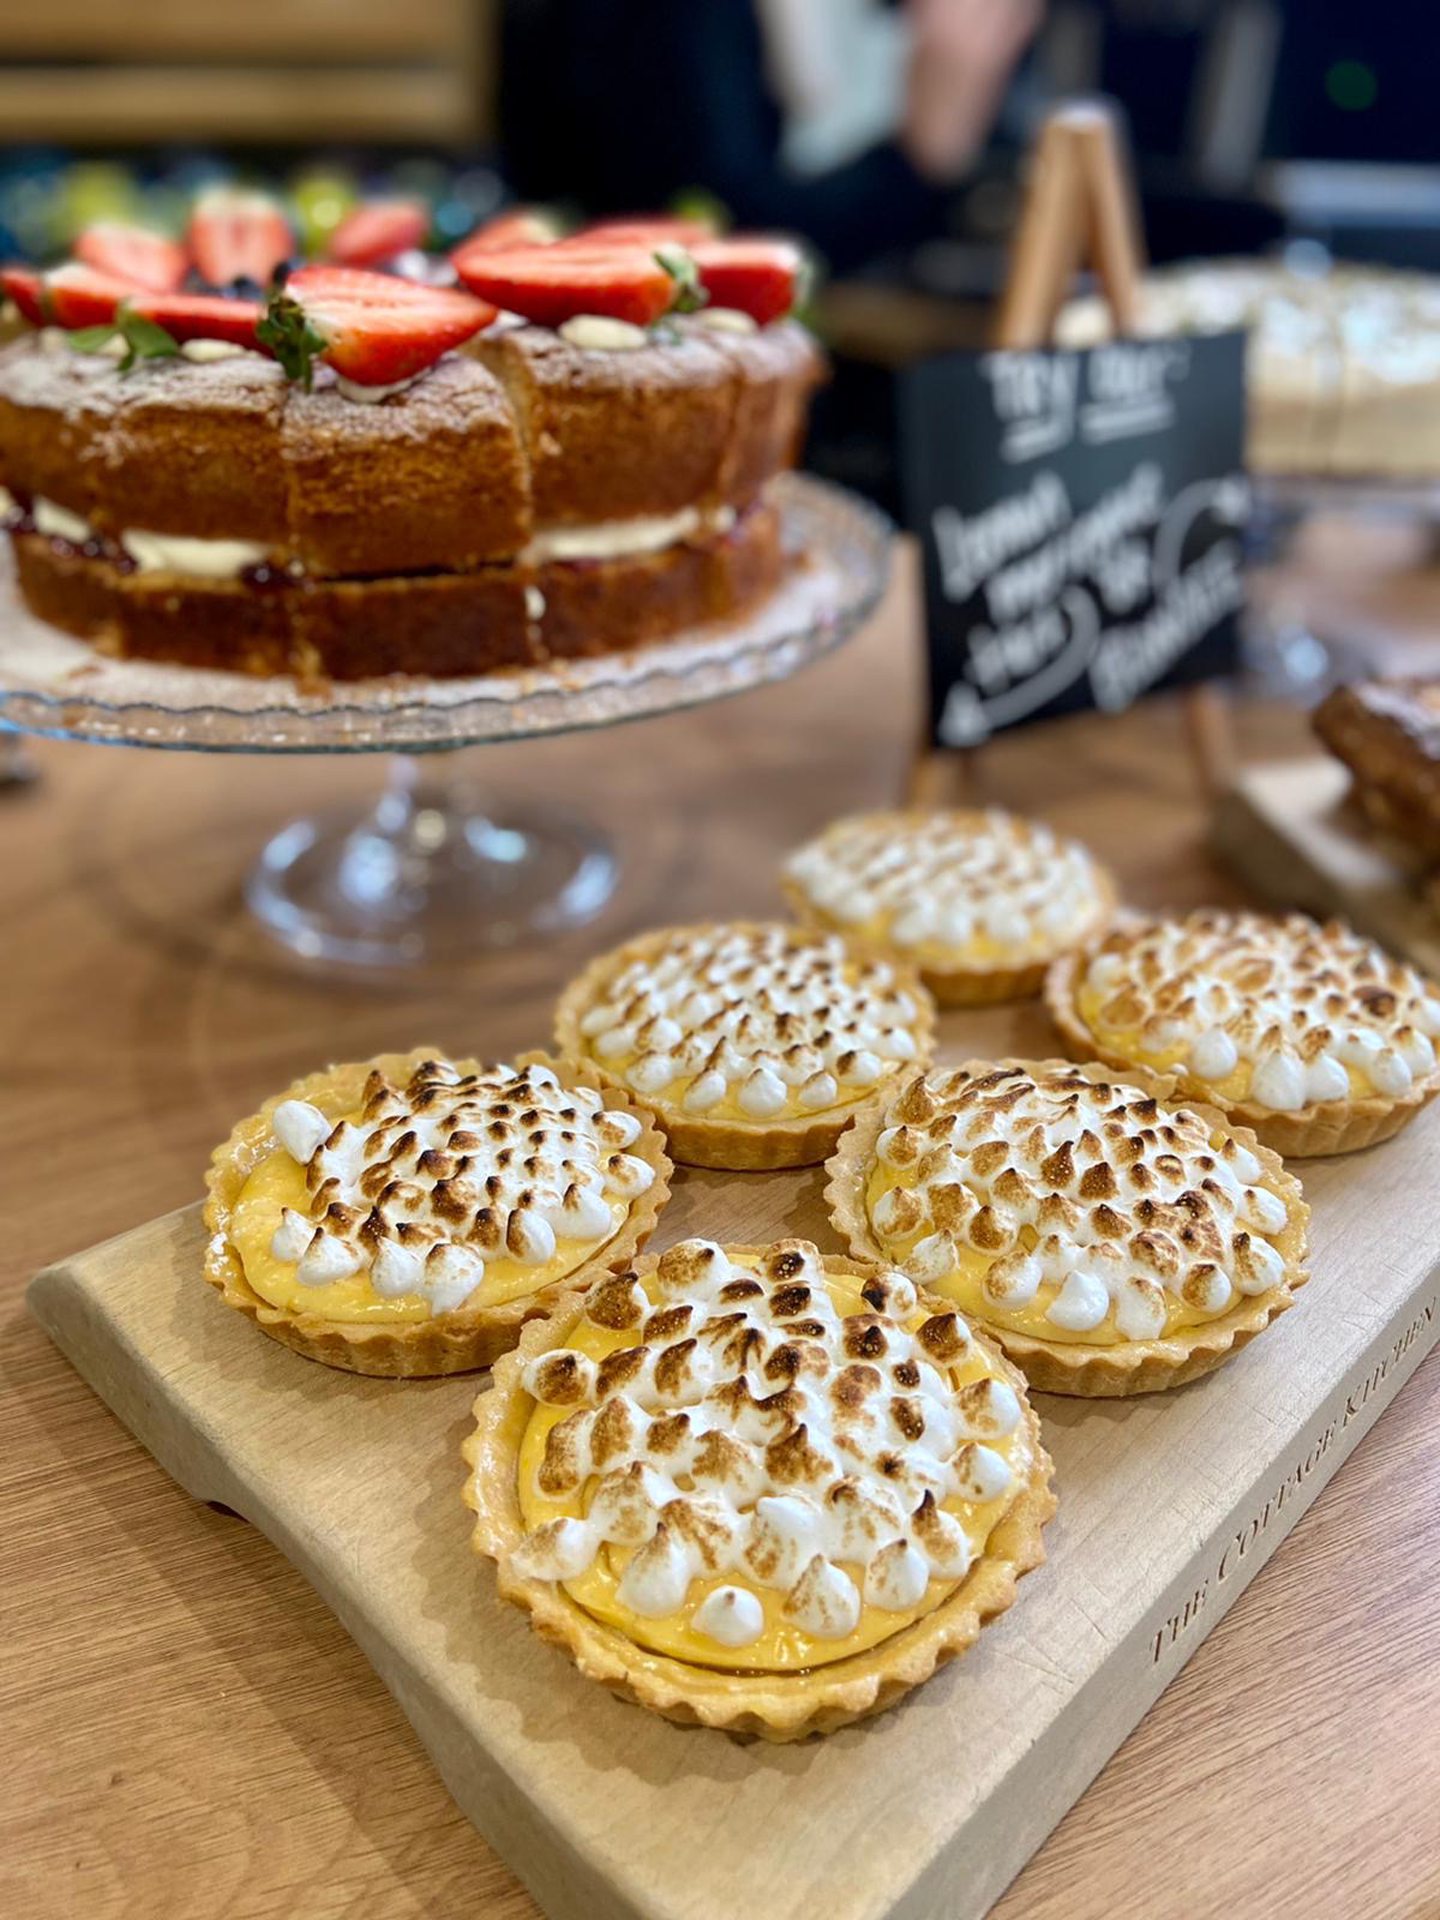 Tarts and cakes available at The Cottage Kitchen